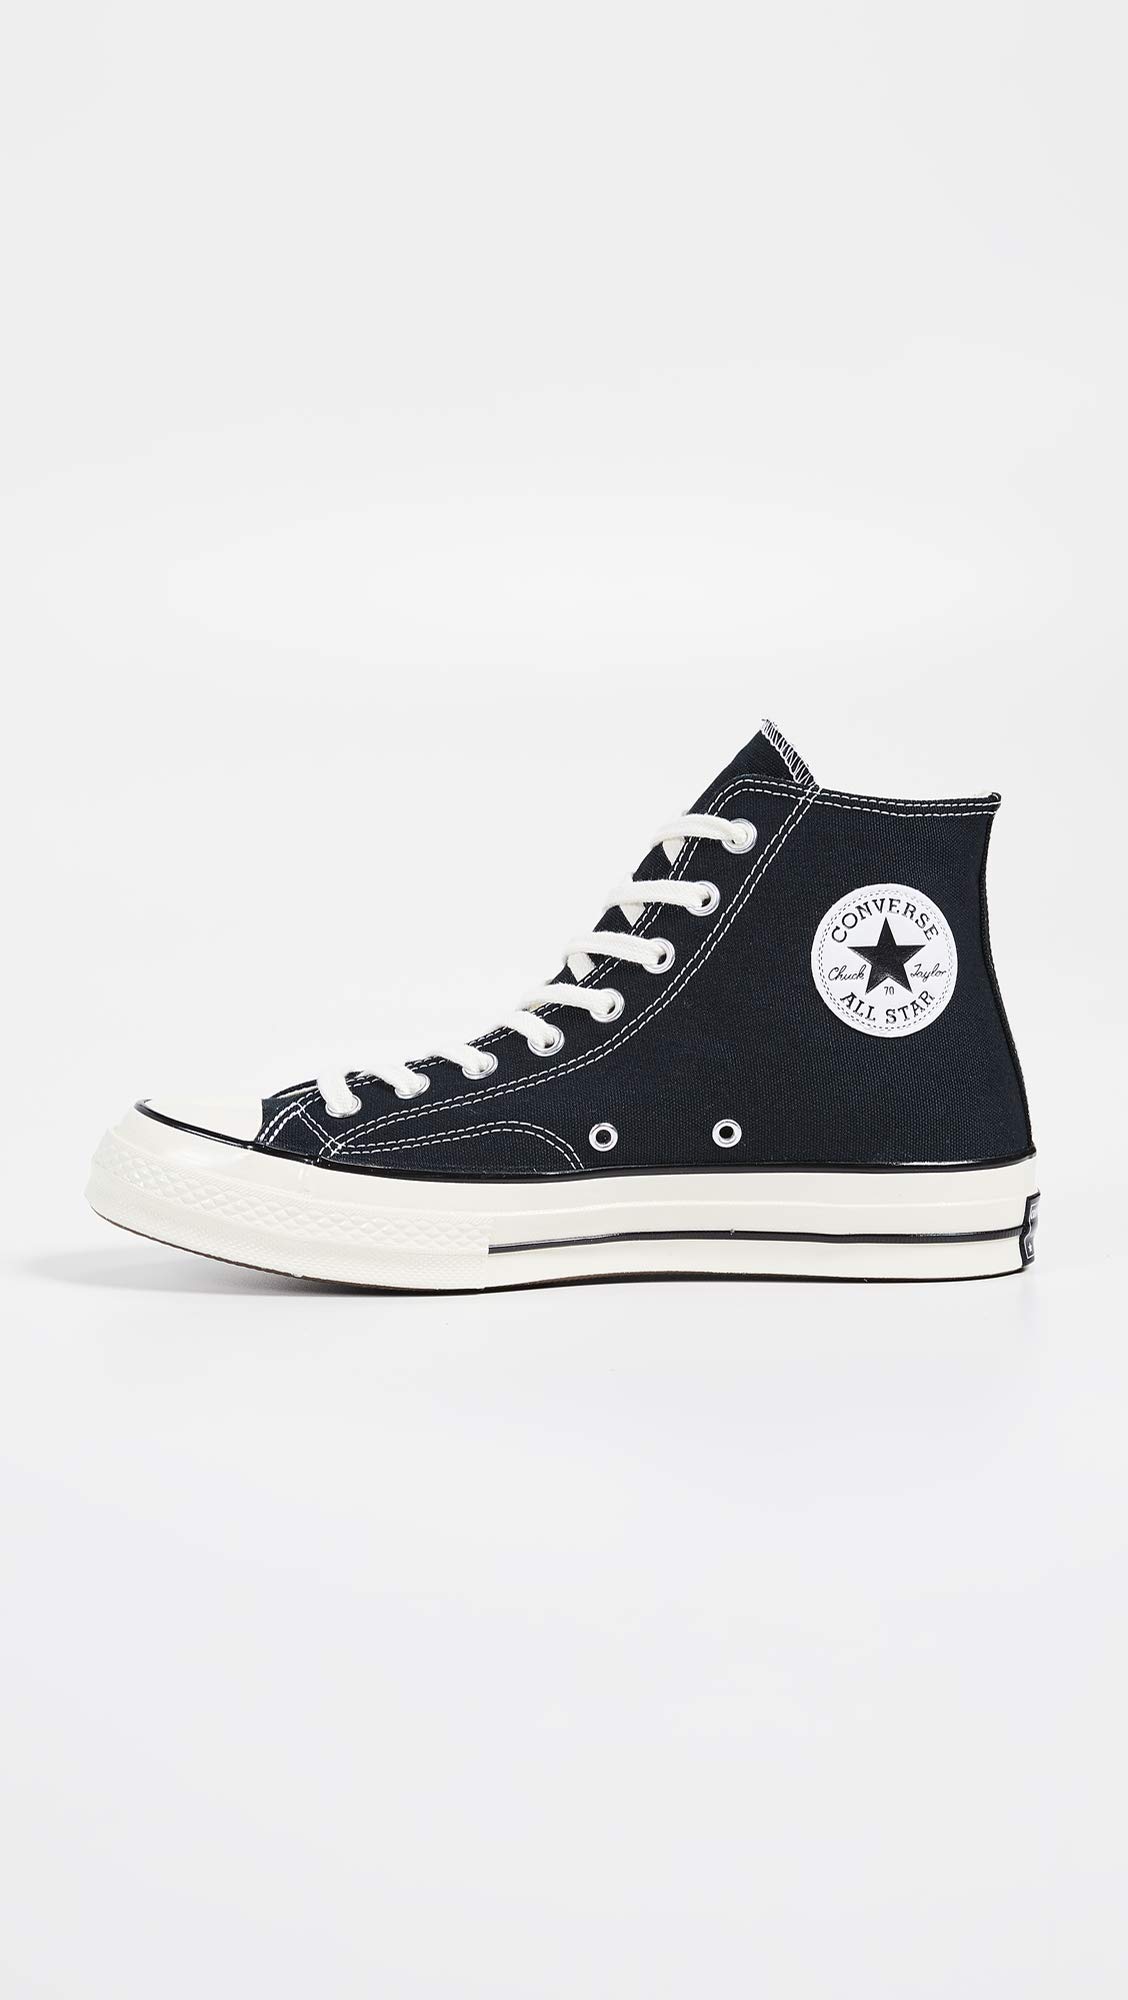 Converse Unisex All Star '70s High Top Sneakers